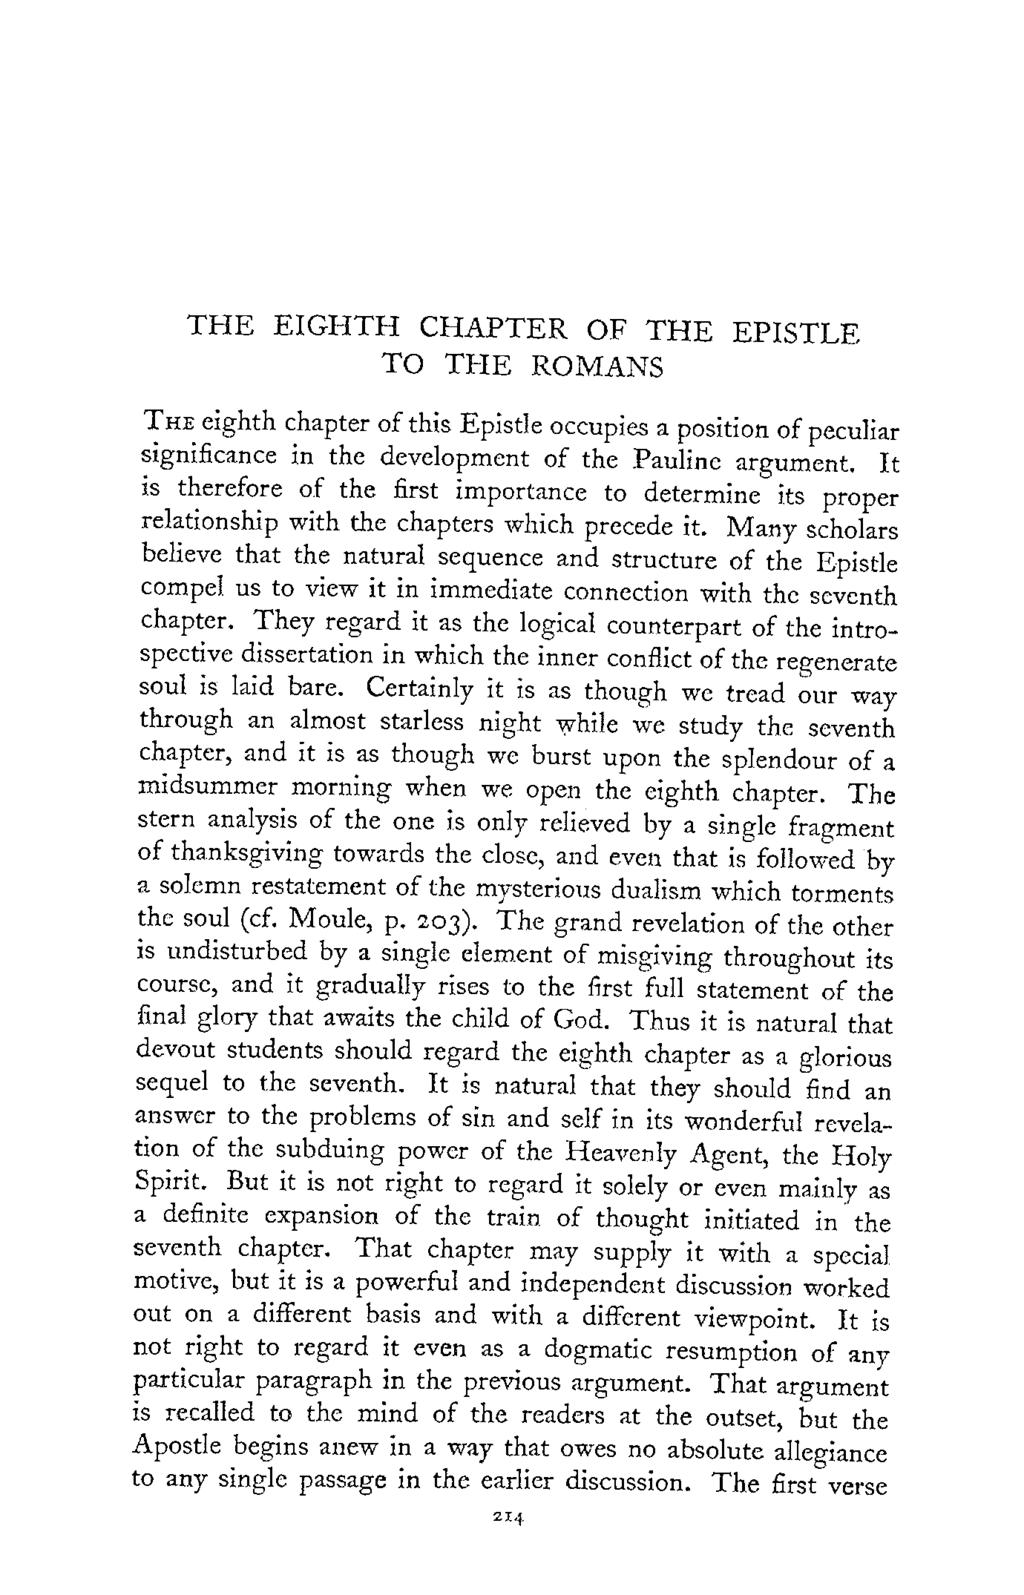 THE EIGHTH CHAPTER OF THE EPISTLE TO THE ROMANS THE eighth chapter of this Epistle occupies a position of peculiar significance in the development of the Pauline argument.